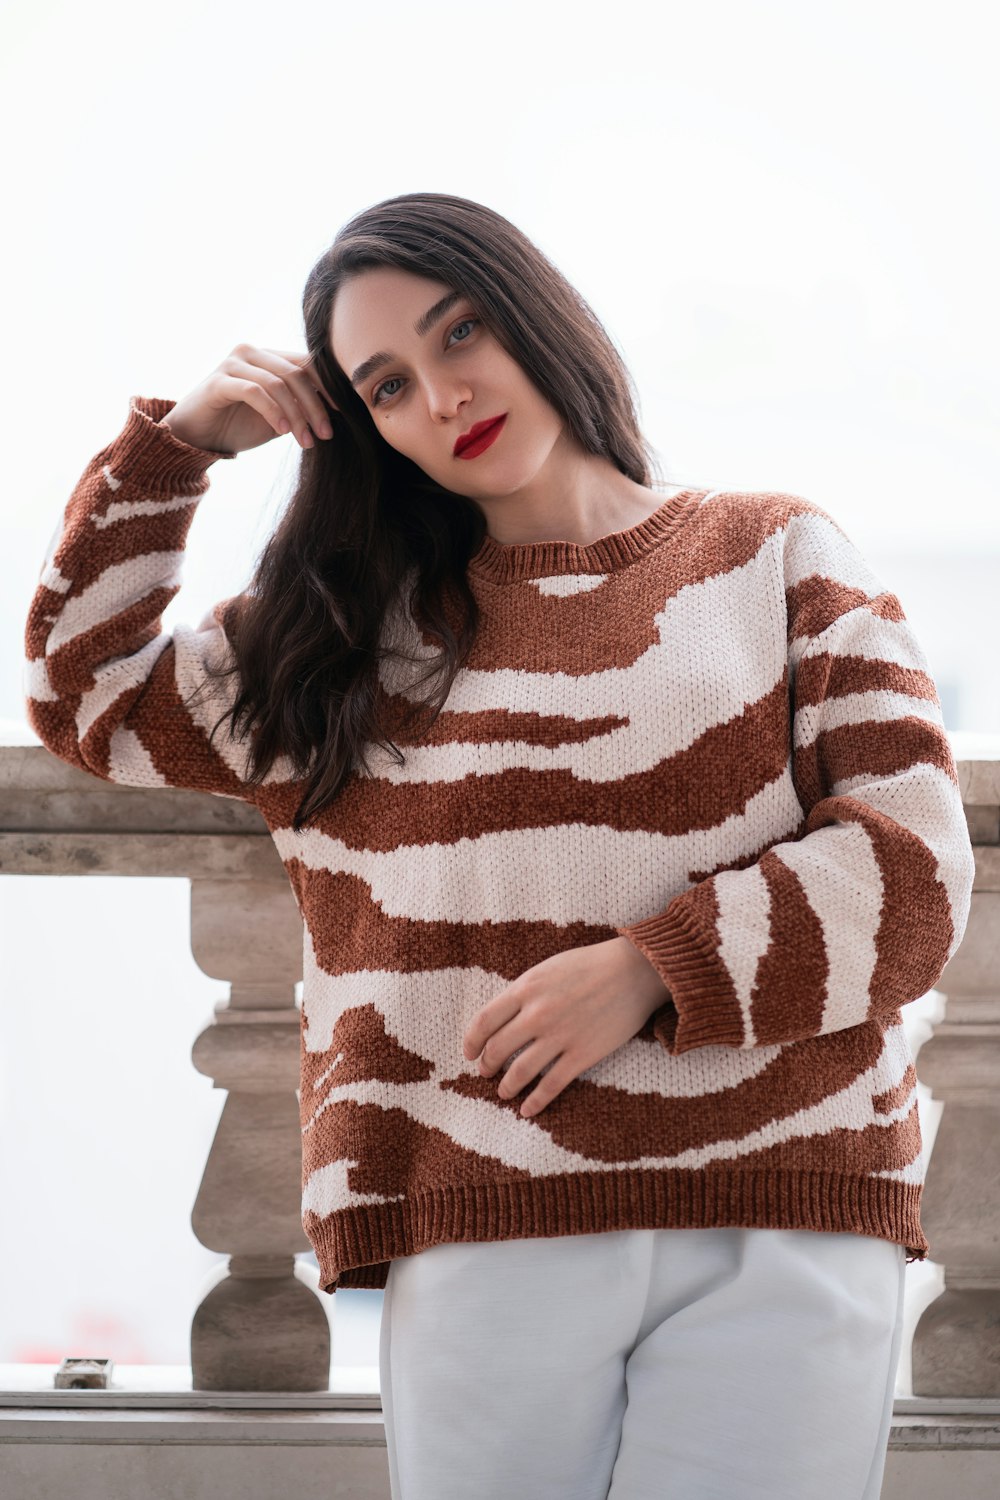 a woman wearing a brown and white sweater